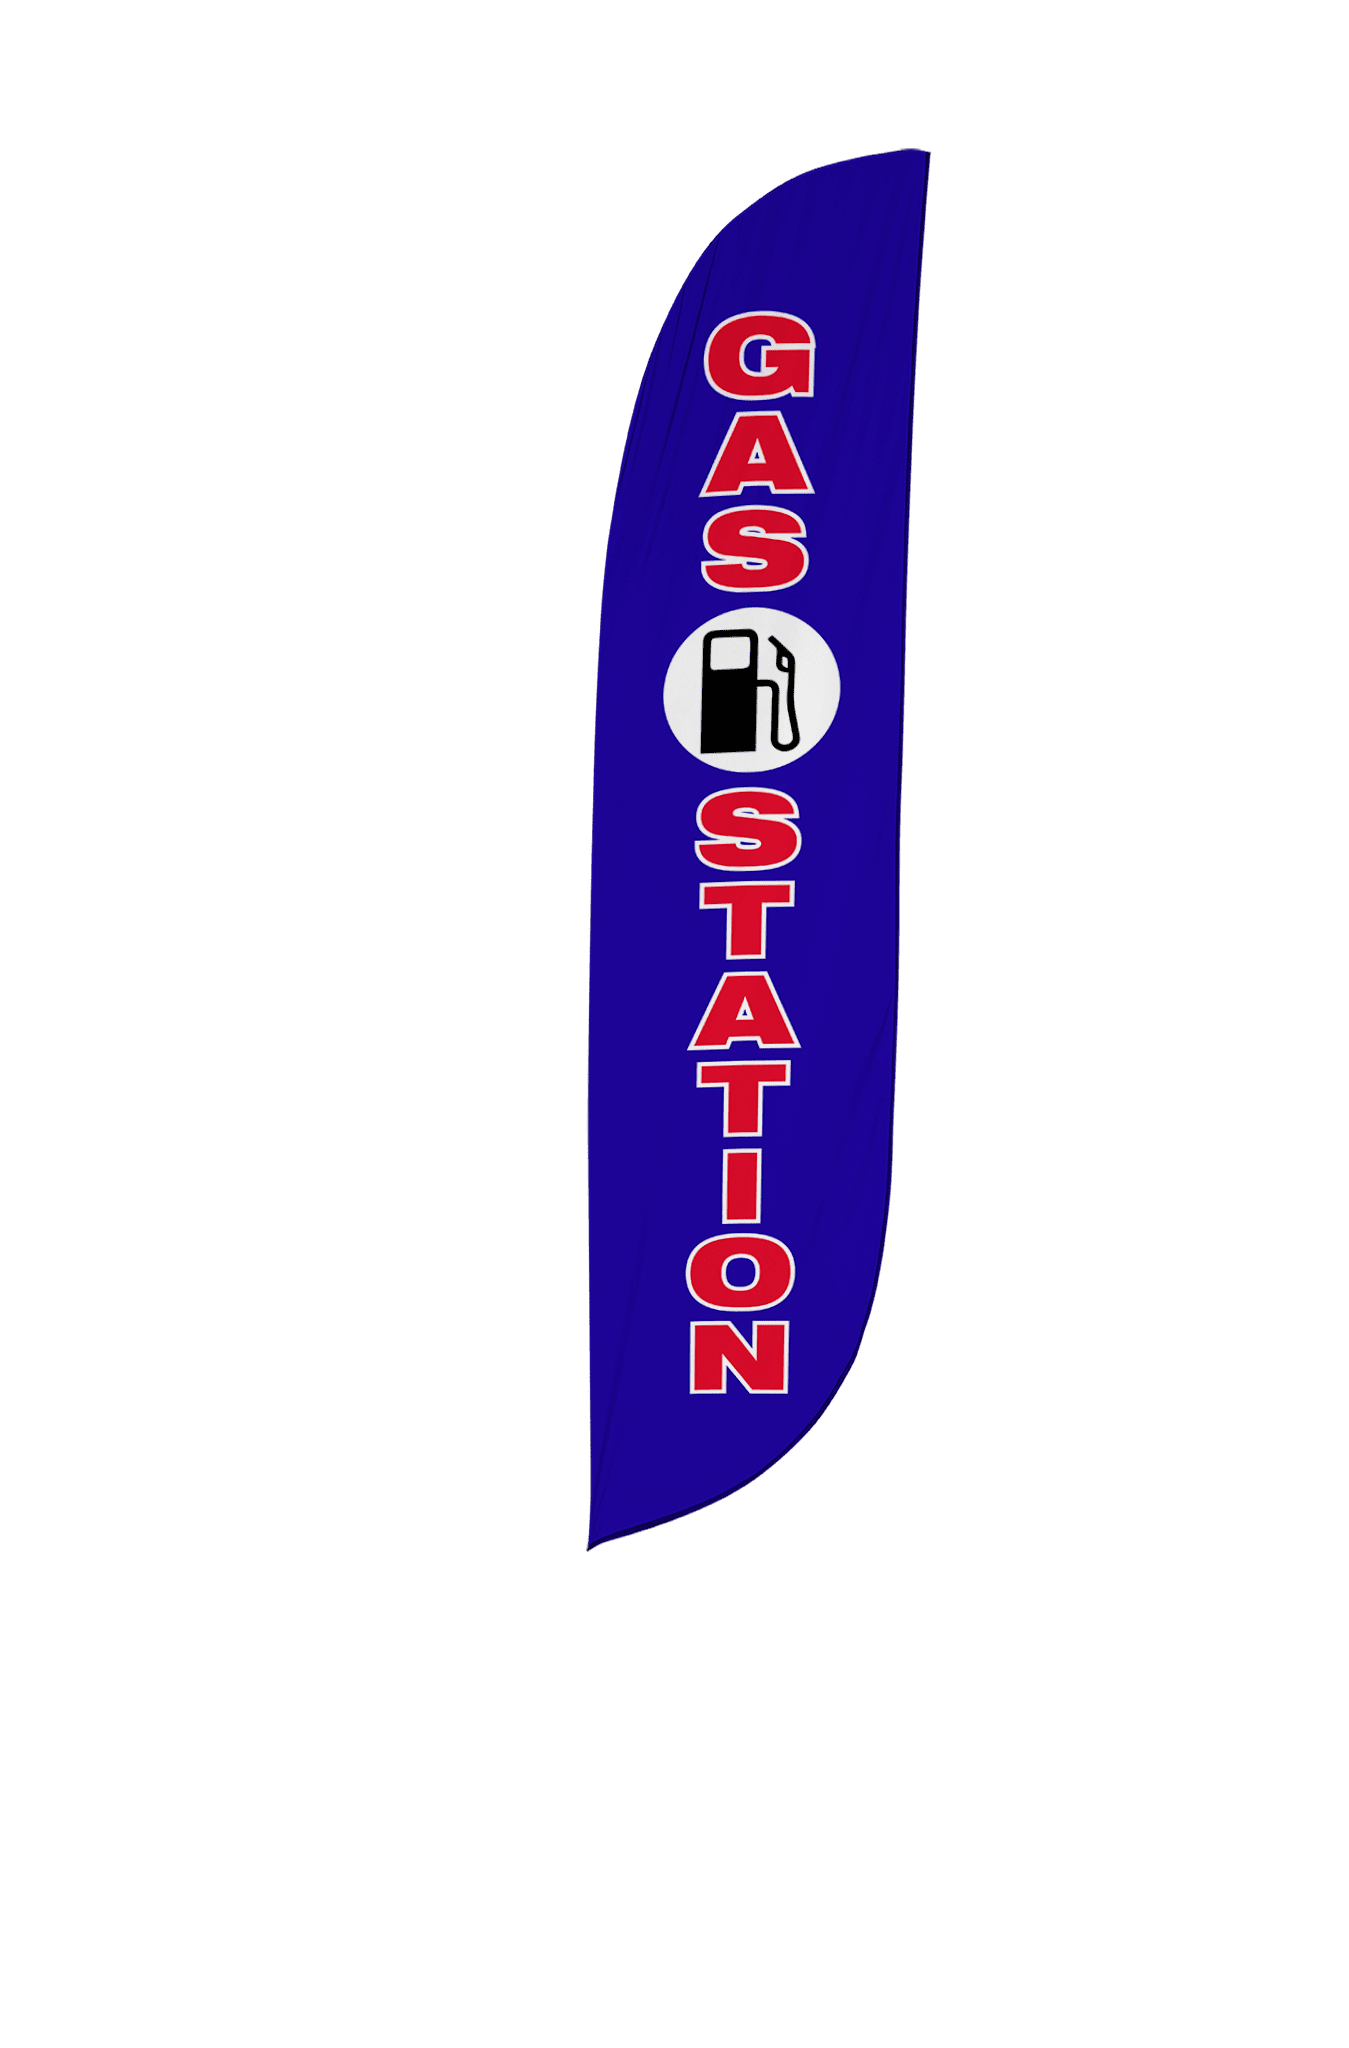 Gas Station Feather Flag 